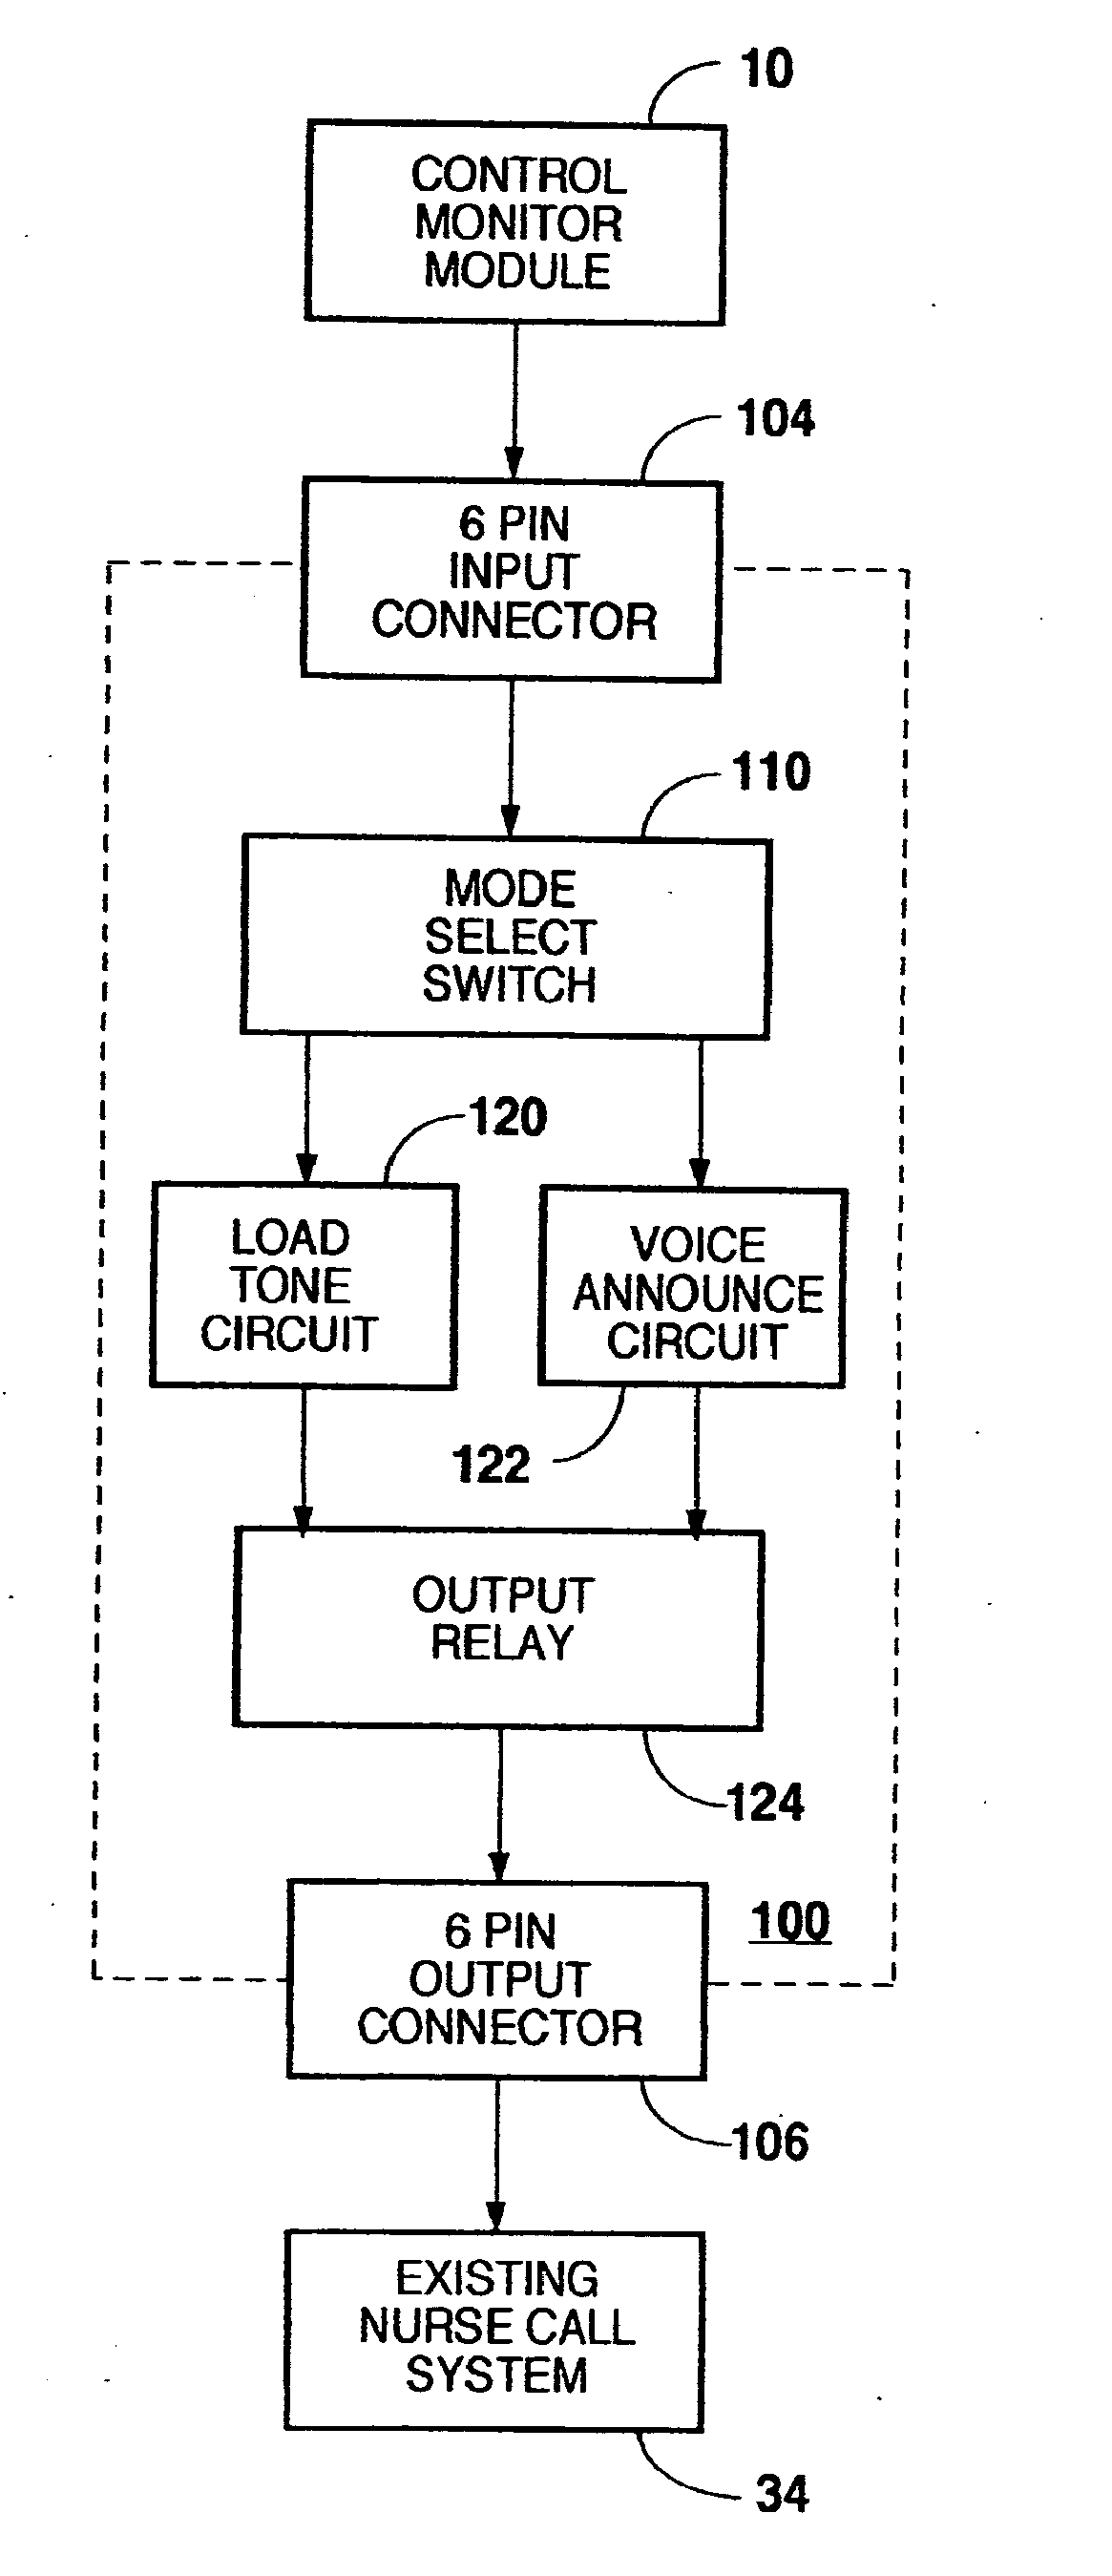 Modular System for Monitoring the Presence of a Person Using a Variety of Sensing Devices